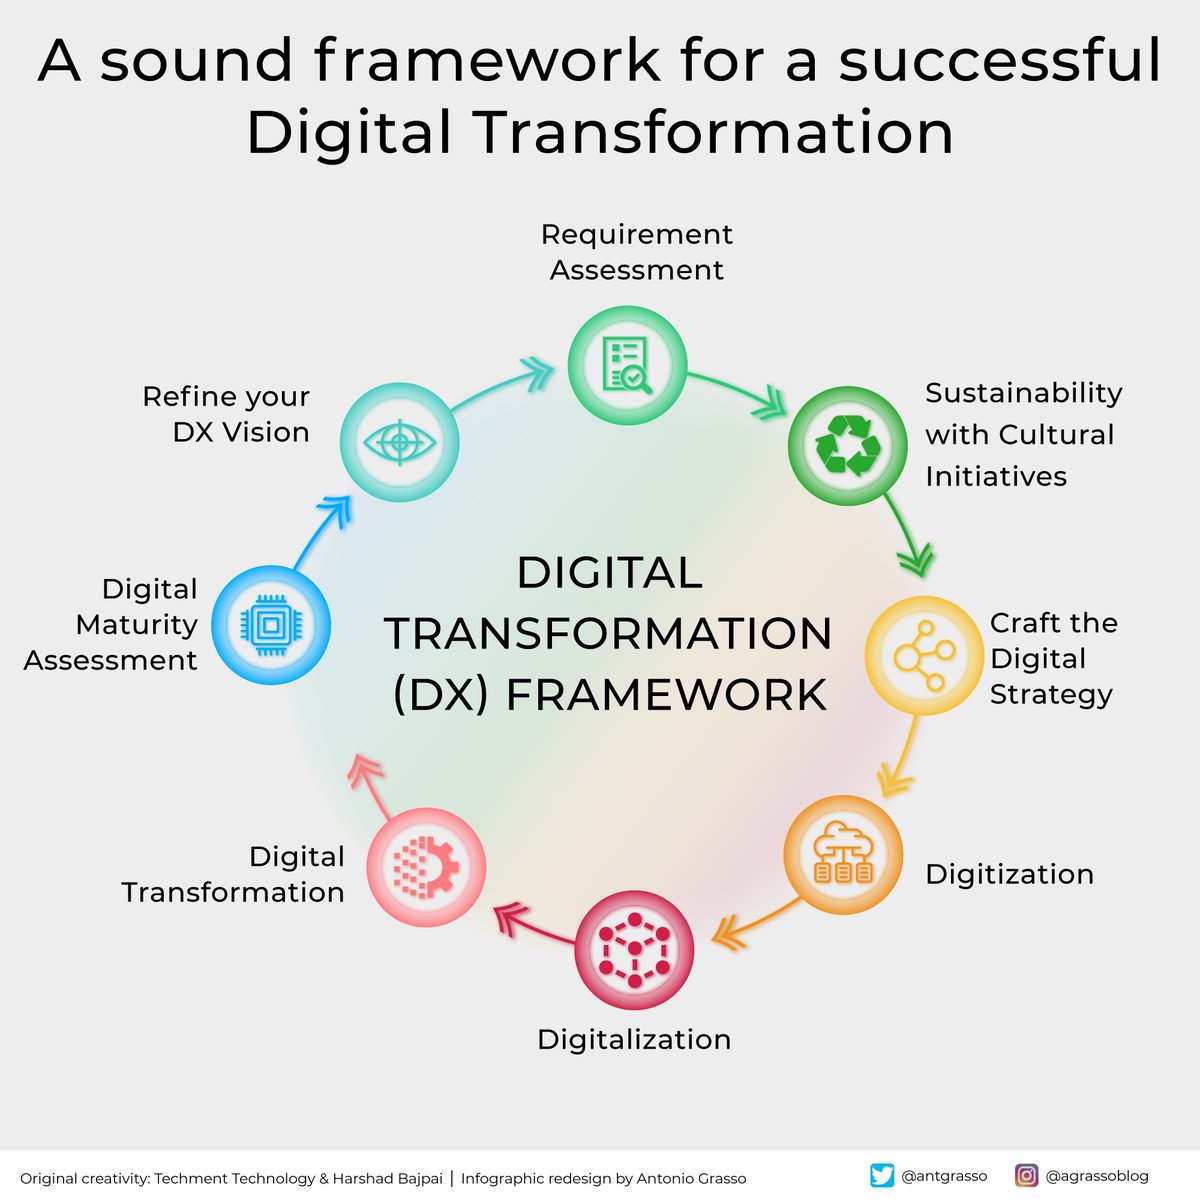 Let's start by assessing our company's digital maturity, doing a gap analysis between where we are and where we would like to go, defining our digital strategy, inserting sustainability into our operational plans, and setting off. Microblog @antgrasso #DigitalTransformation